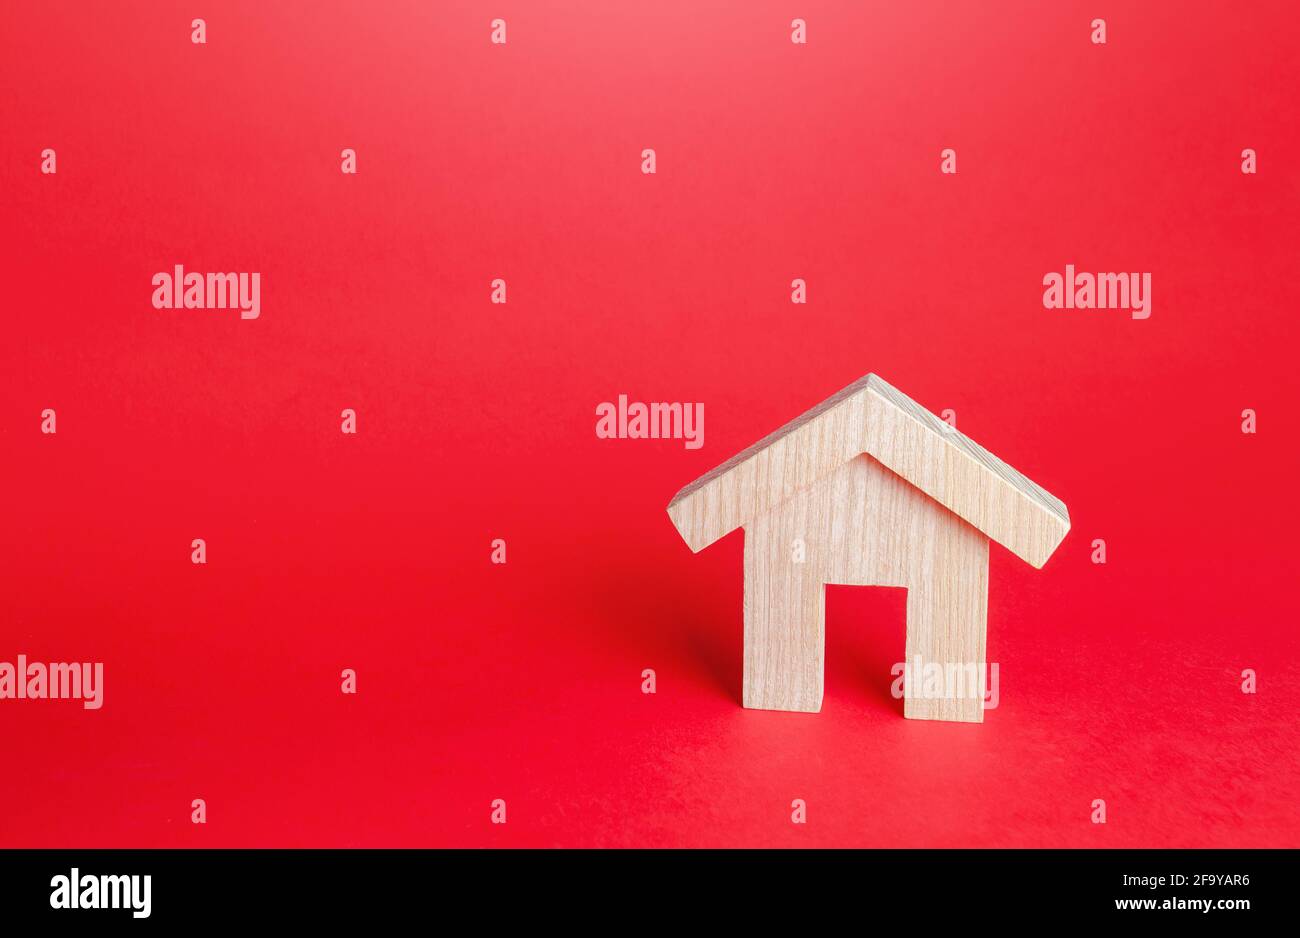 Wooden house on a red background. Buying and selling. Housing, realtor services. Mortgage loan. Construction industry, building maintenance. Renovatio Stock Photo